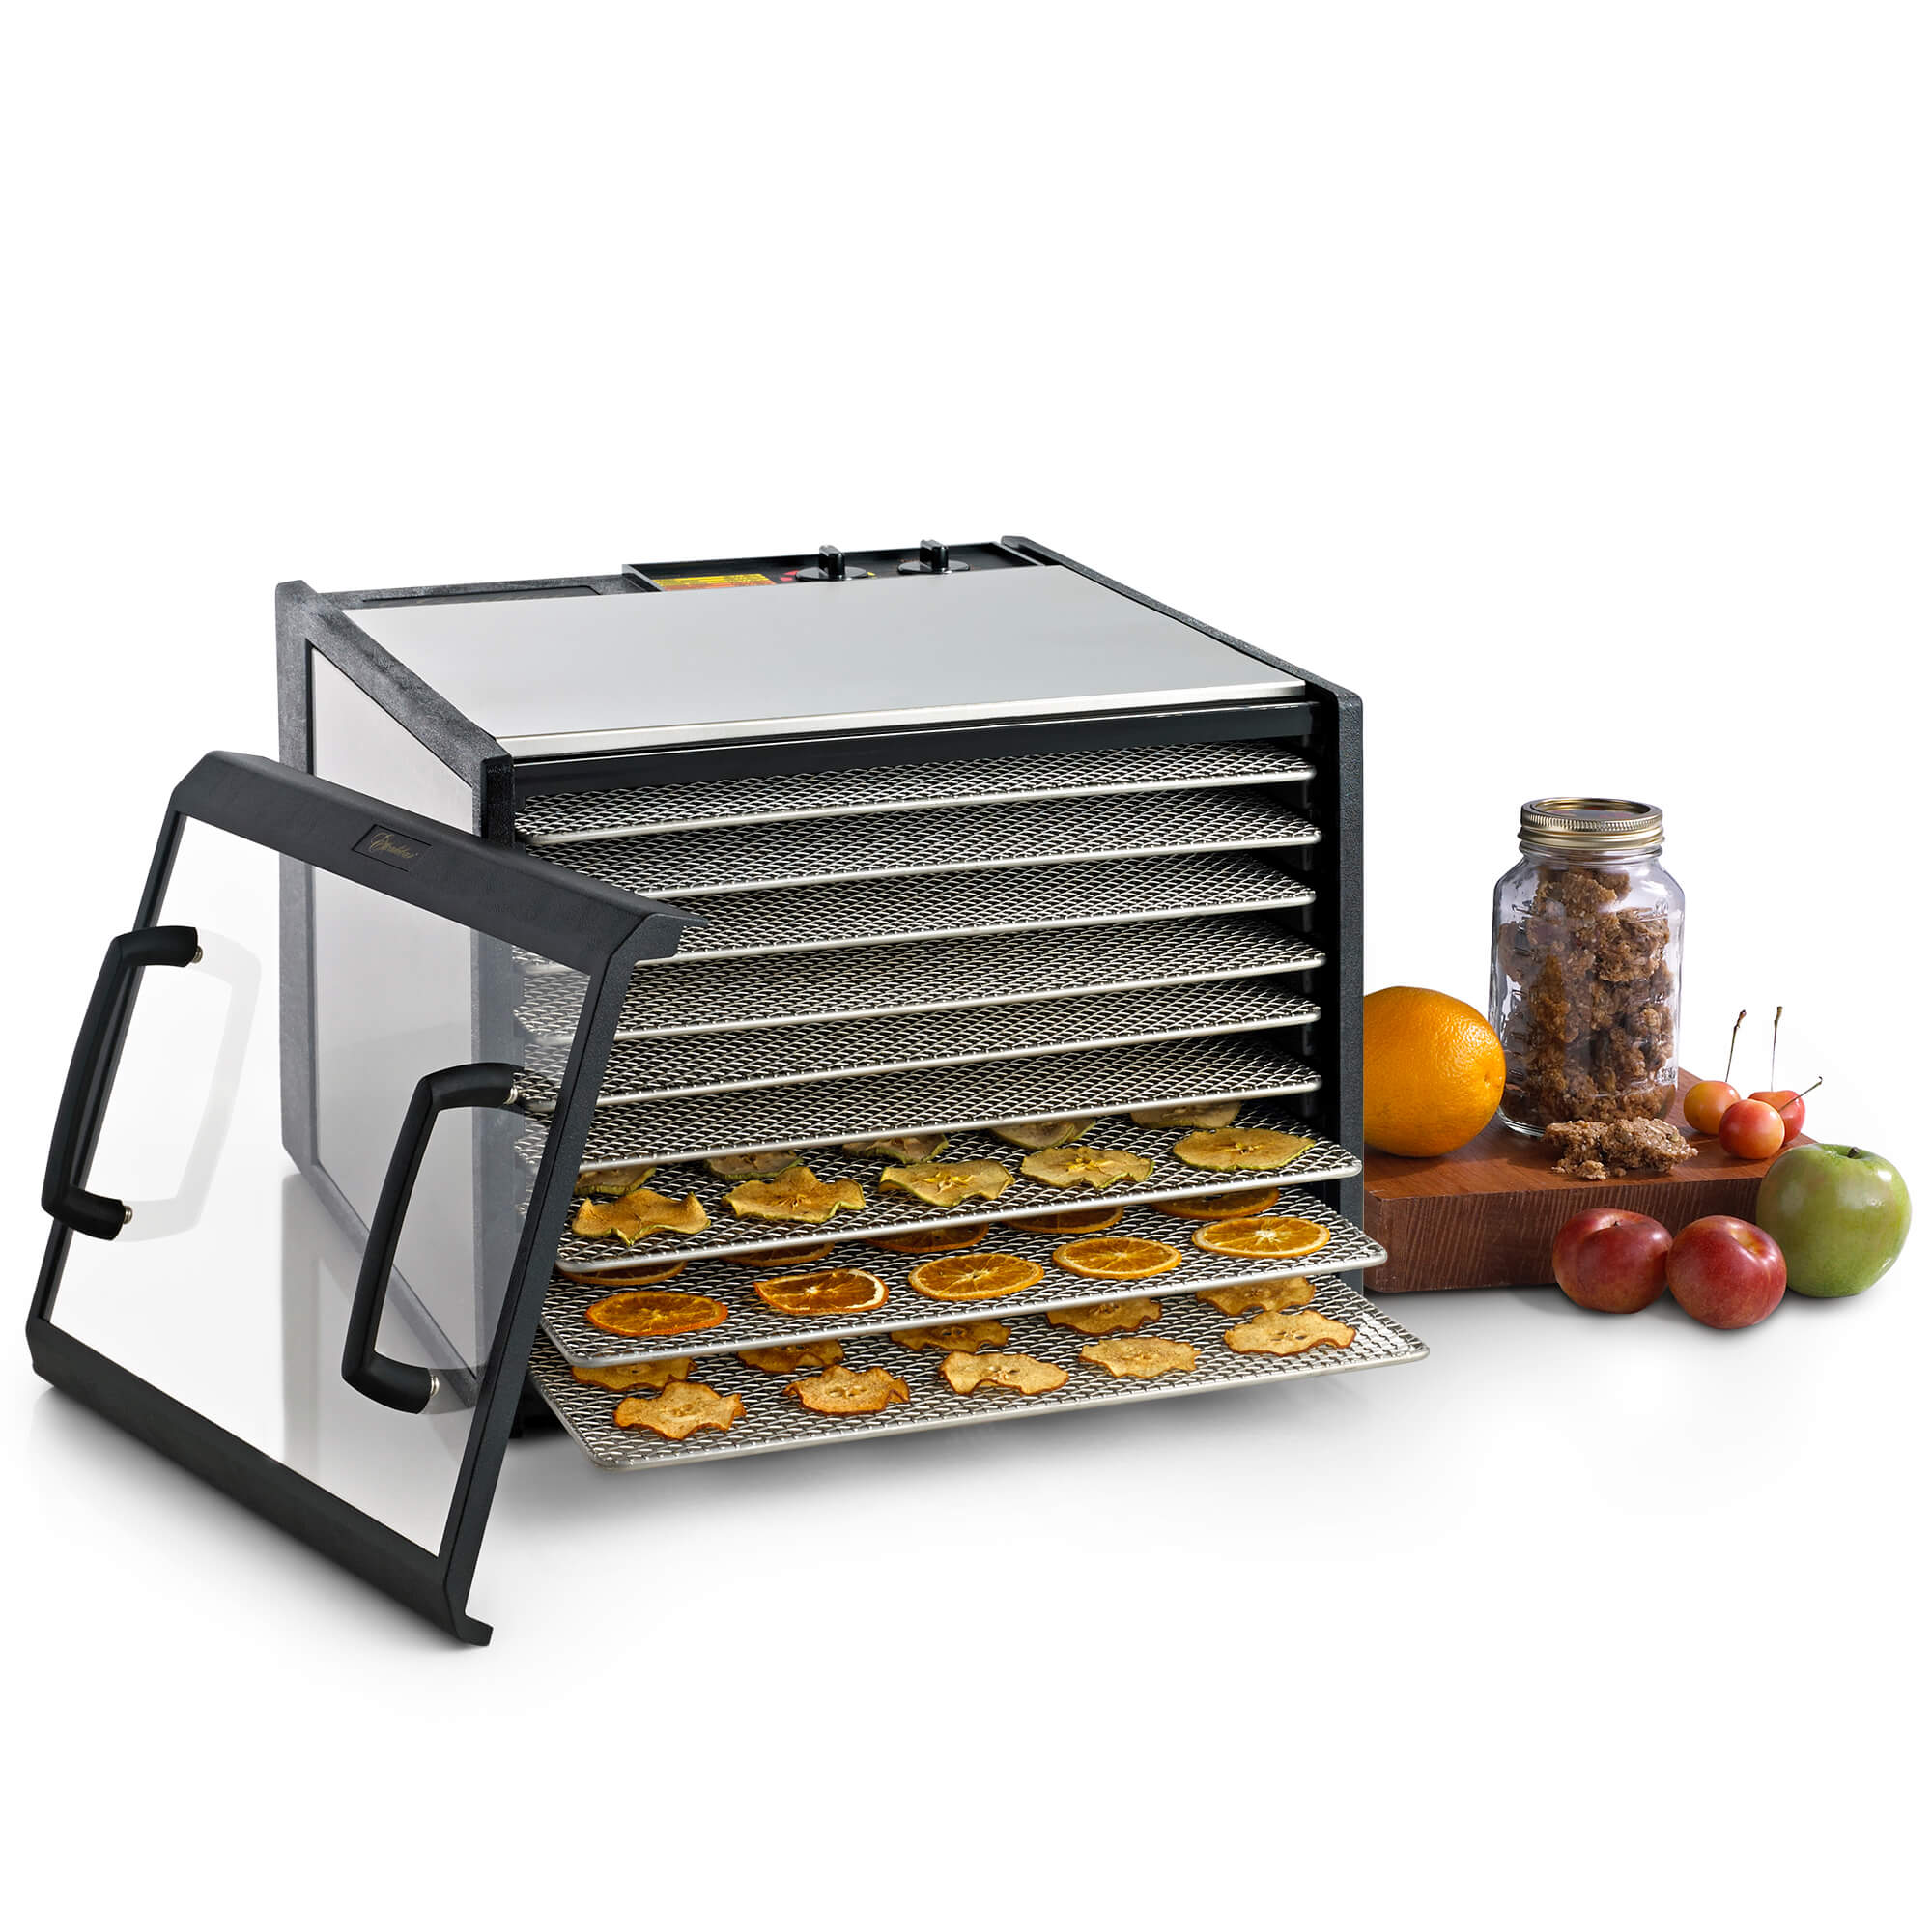 Excalibur D902CDSHD 9 tray stainless steel dehydrator with clear door propped to the side and food on the trays.